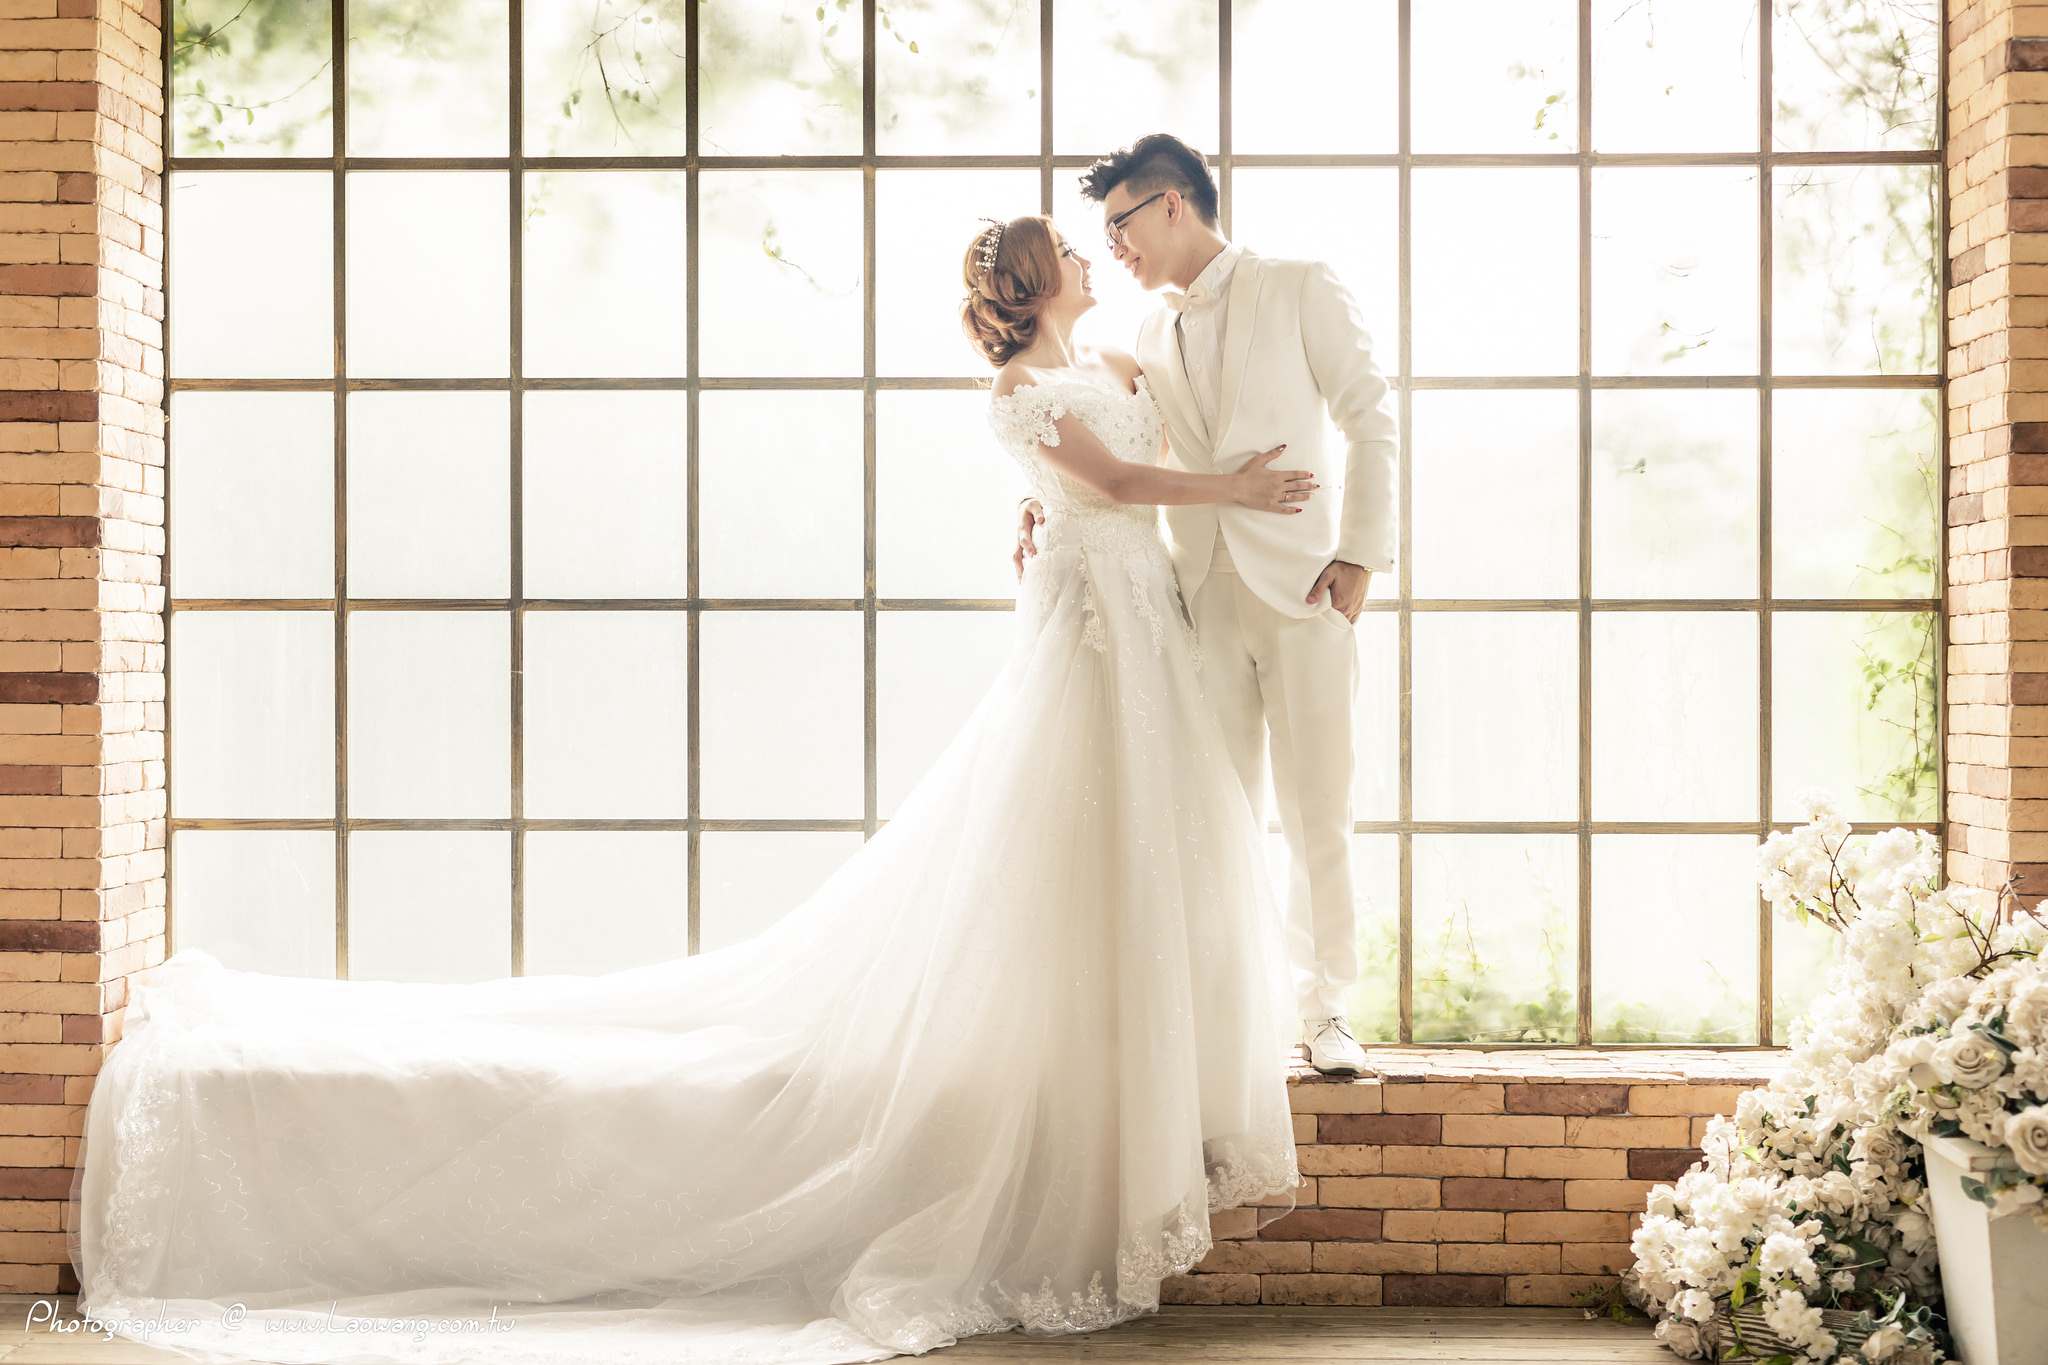 wedding photography16 The Best Wedding Photography Ideas by Lao Wang